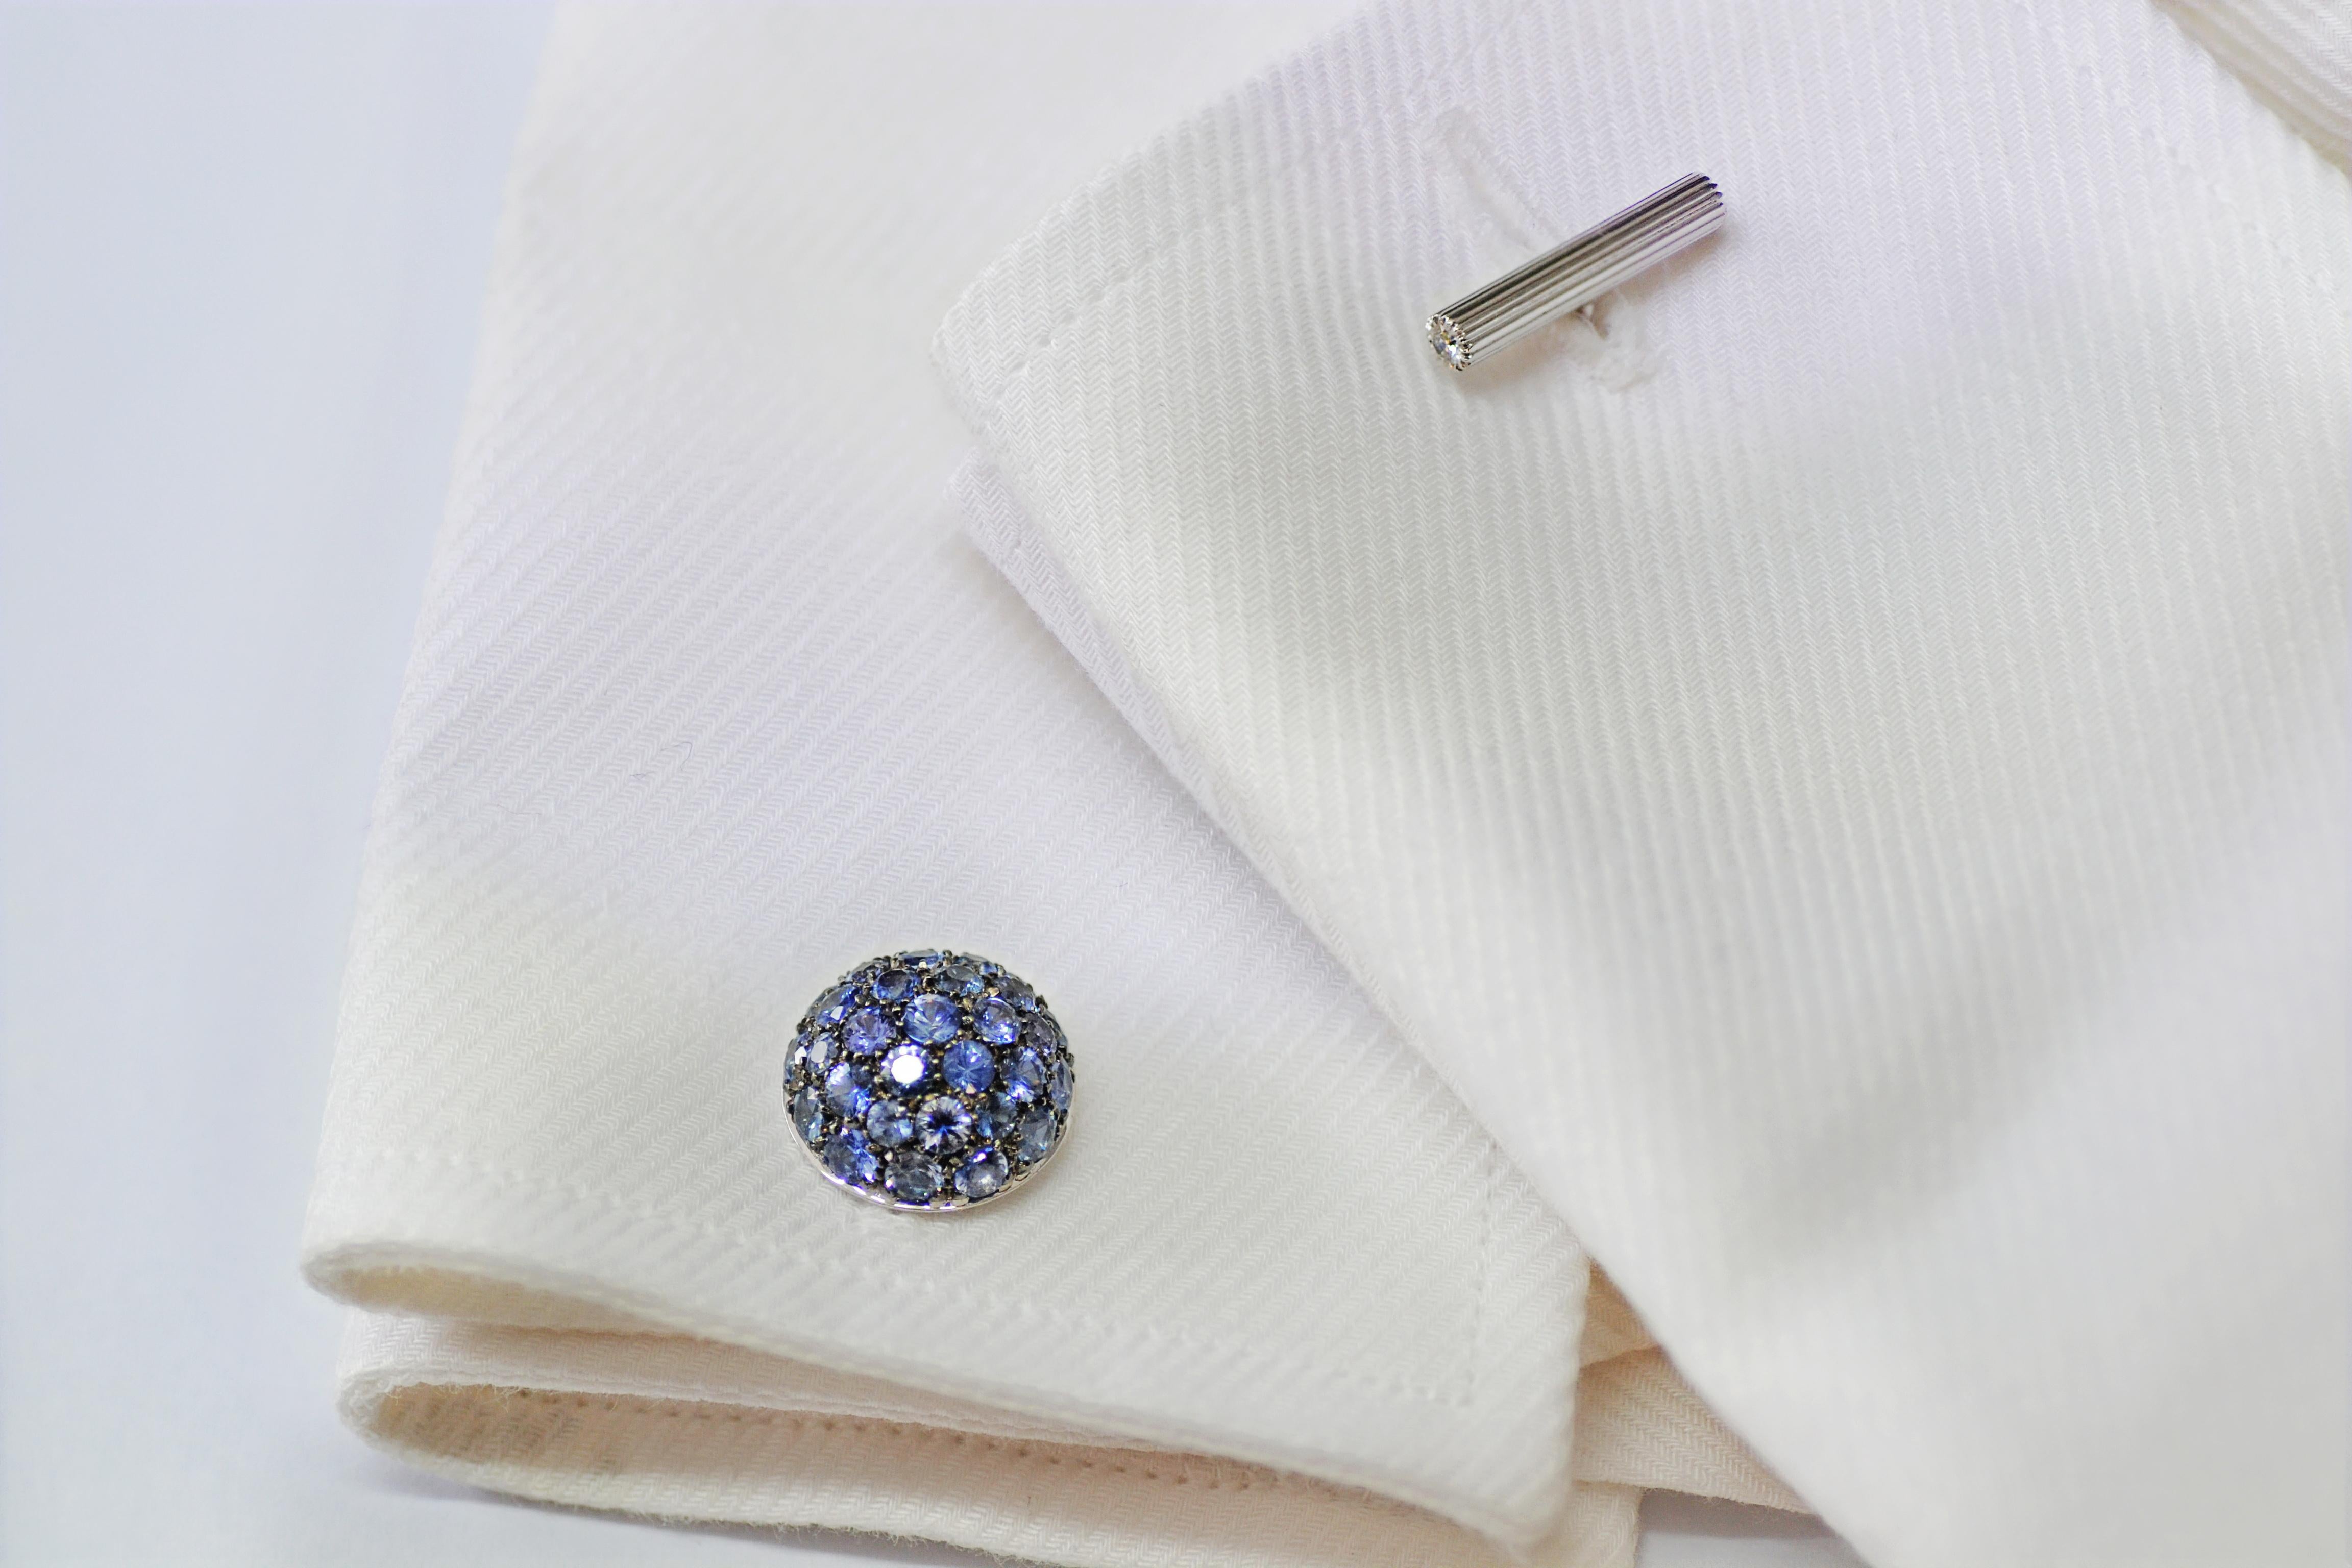 Handcrafted in Margherita Burgener family workshop, located in Valenza - Italy
The cufflinks are bombé, like an half ball, fully pavé set in blue sapphires. 
The pavé part is blackened to highlight the blue of the sapphires. It is a unisex piece of